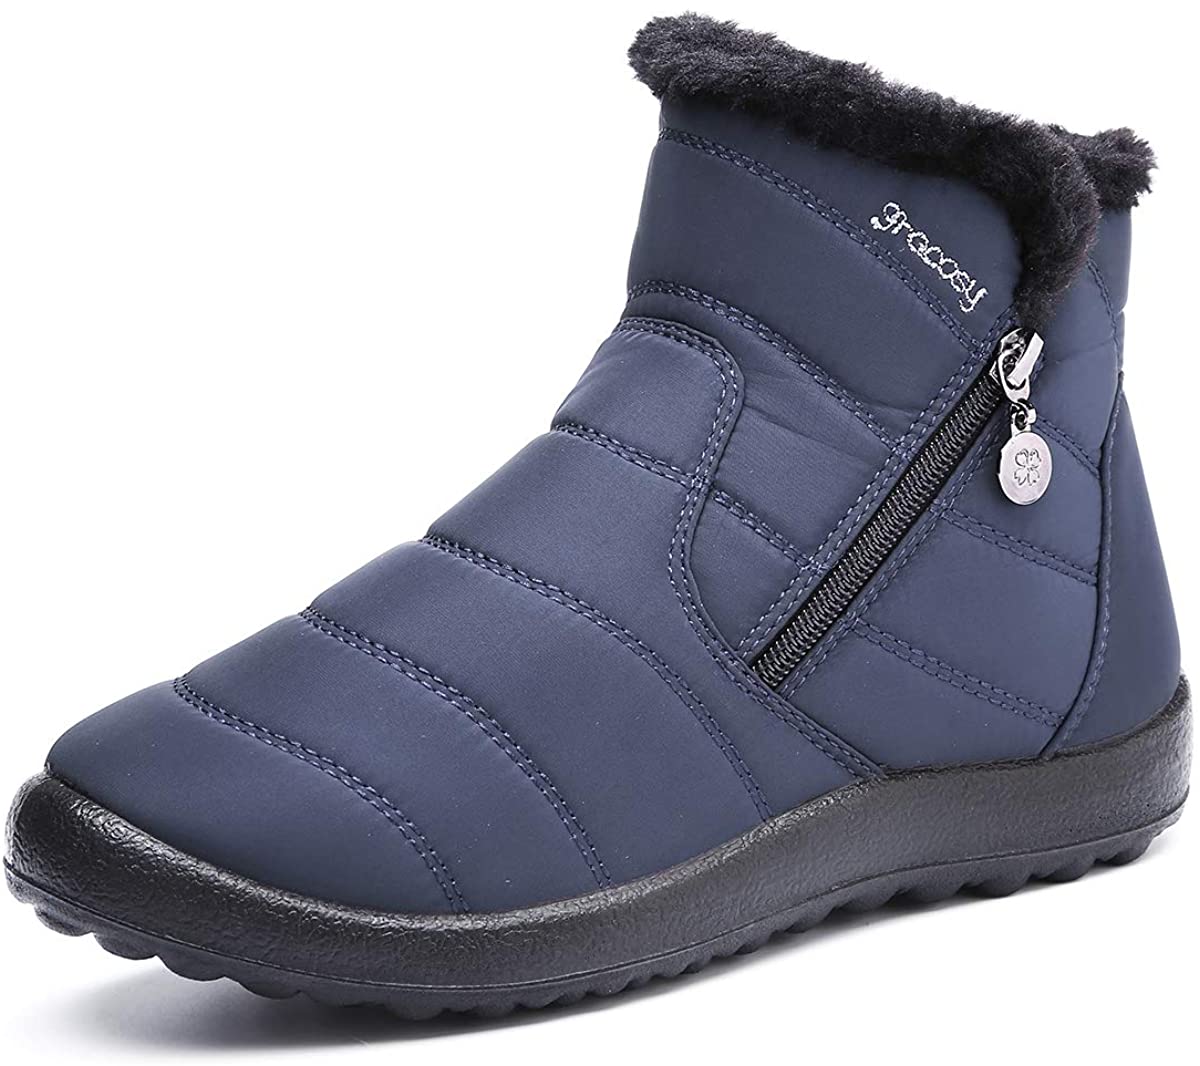 Details about   gracosy Warm Snow Boots Outdoor for Women Winter Fur Lining Shoes Anti-Slip Ligh